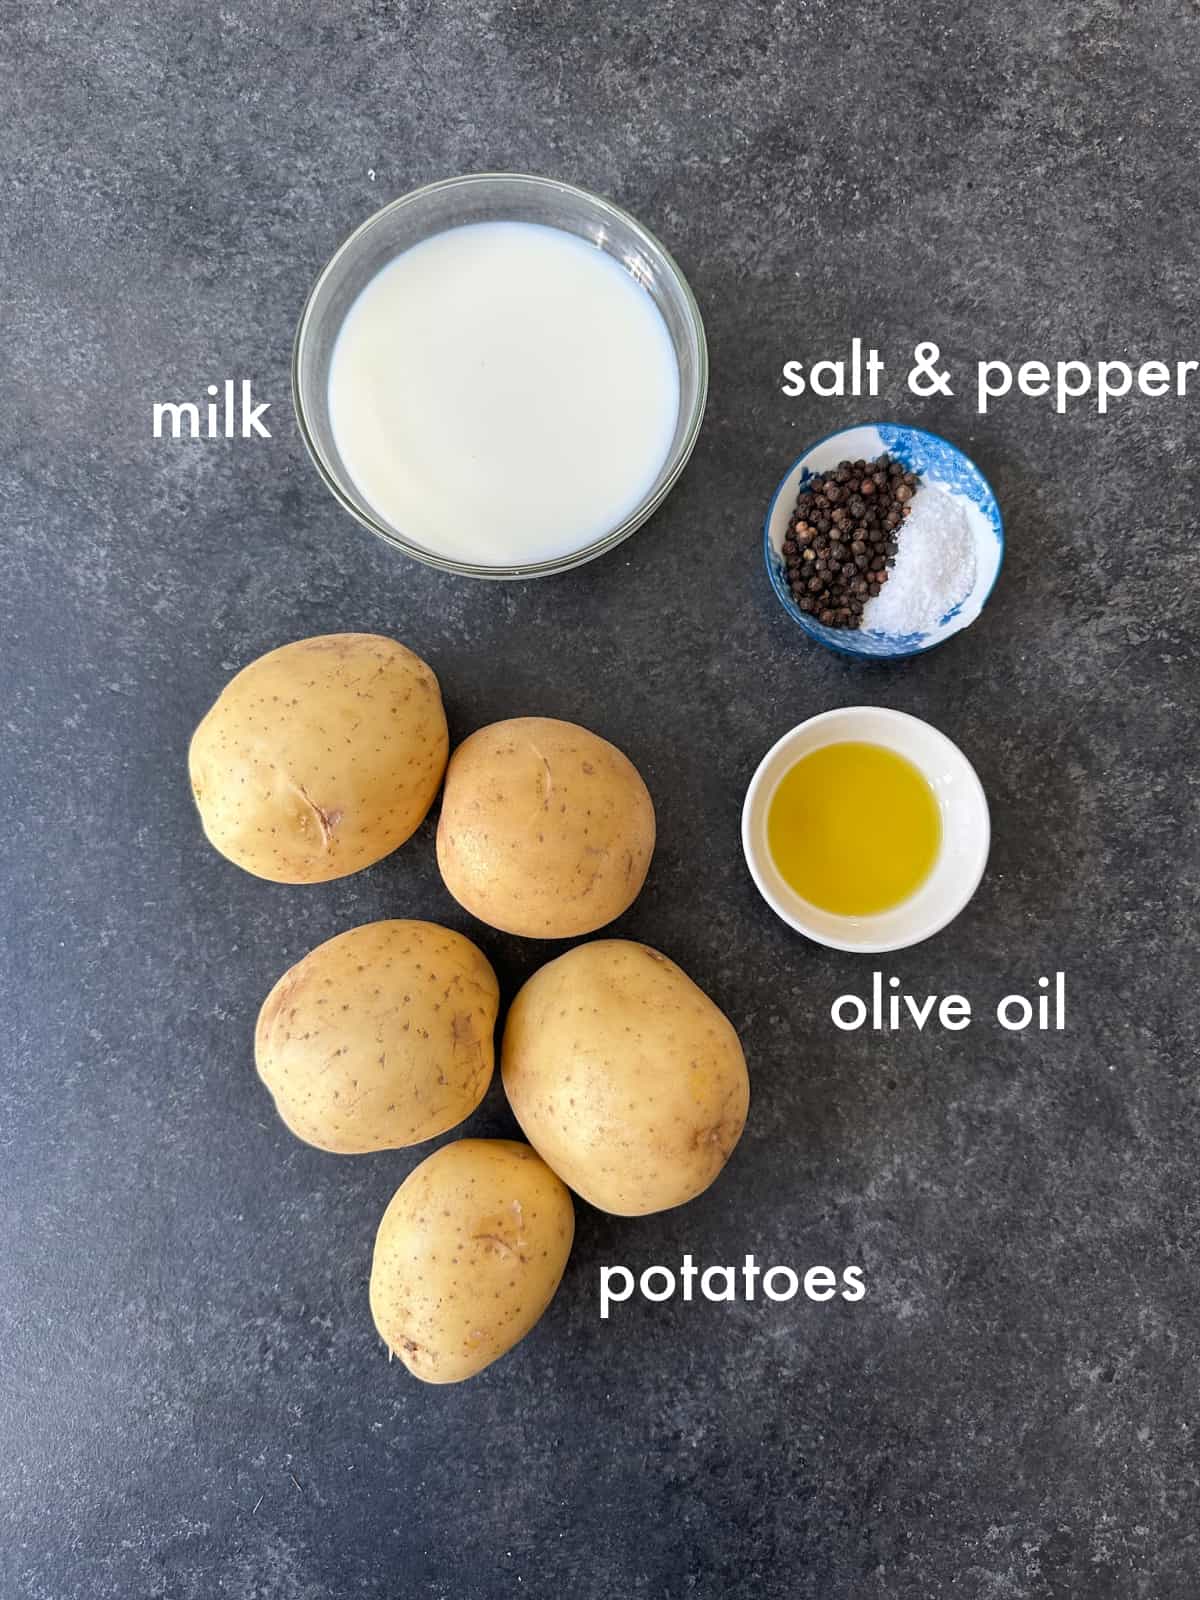 To make this recipe you need potatoes, milk, salt and pepper and olive oil.